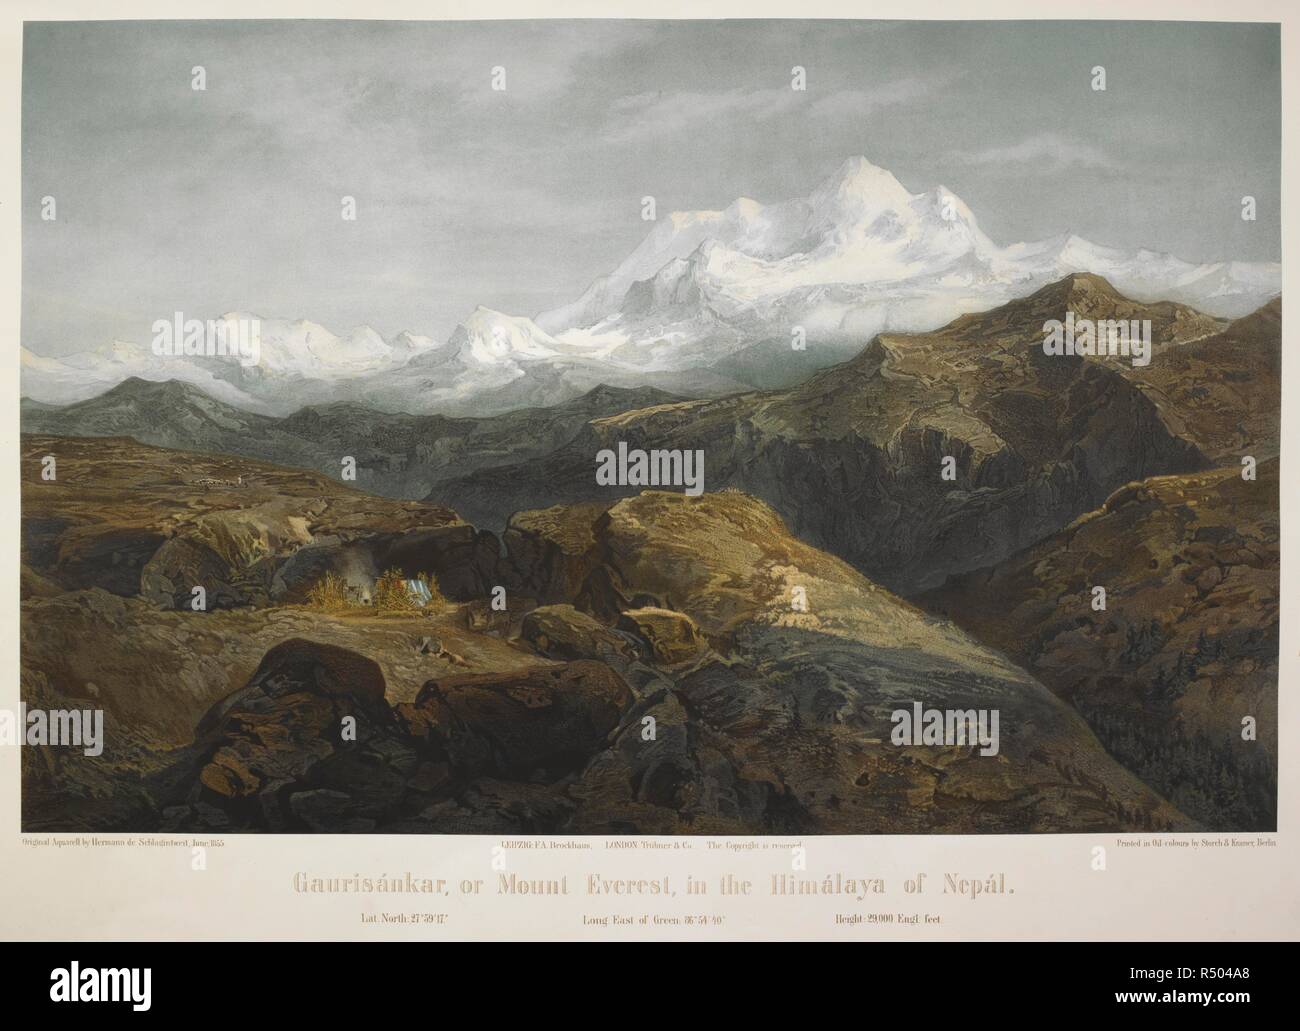 Guarinsankar, or Mount Everest, in the Himalaya of Nepal. . Results of a Scientific Mission to India and High Asia, undertaken between the years 1854 and 1858, by order of the Court of Directors of the Honourable East India Company, by H., A. and R. de Schlagintweit. 19th century. Printed in oil colours. The highest mountain the world. In the Himalayas. Source: 1889.a.8 part 1, plate 1. Stock Photo